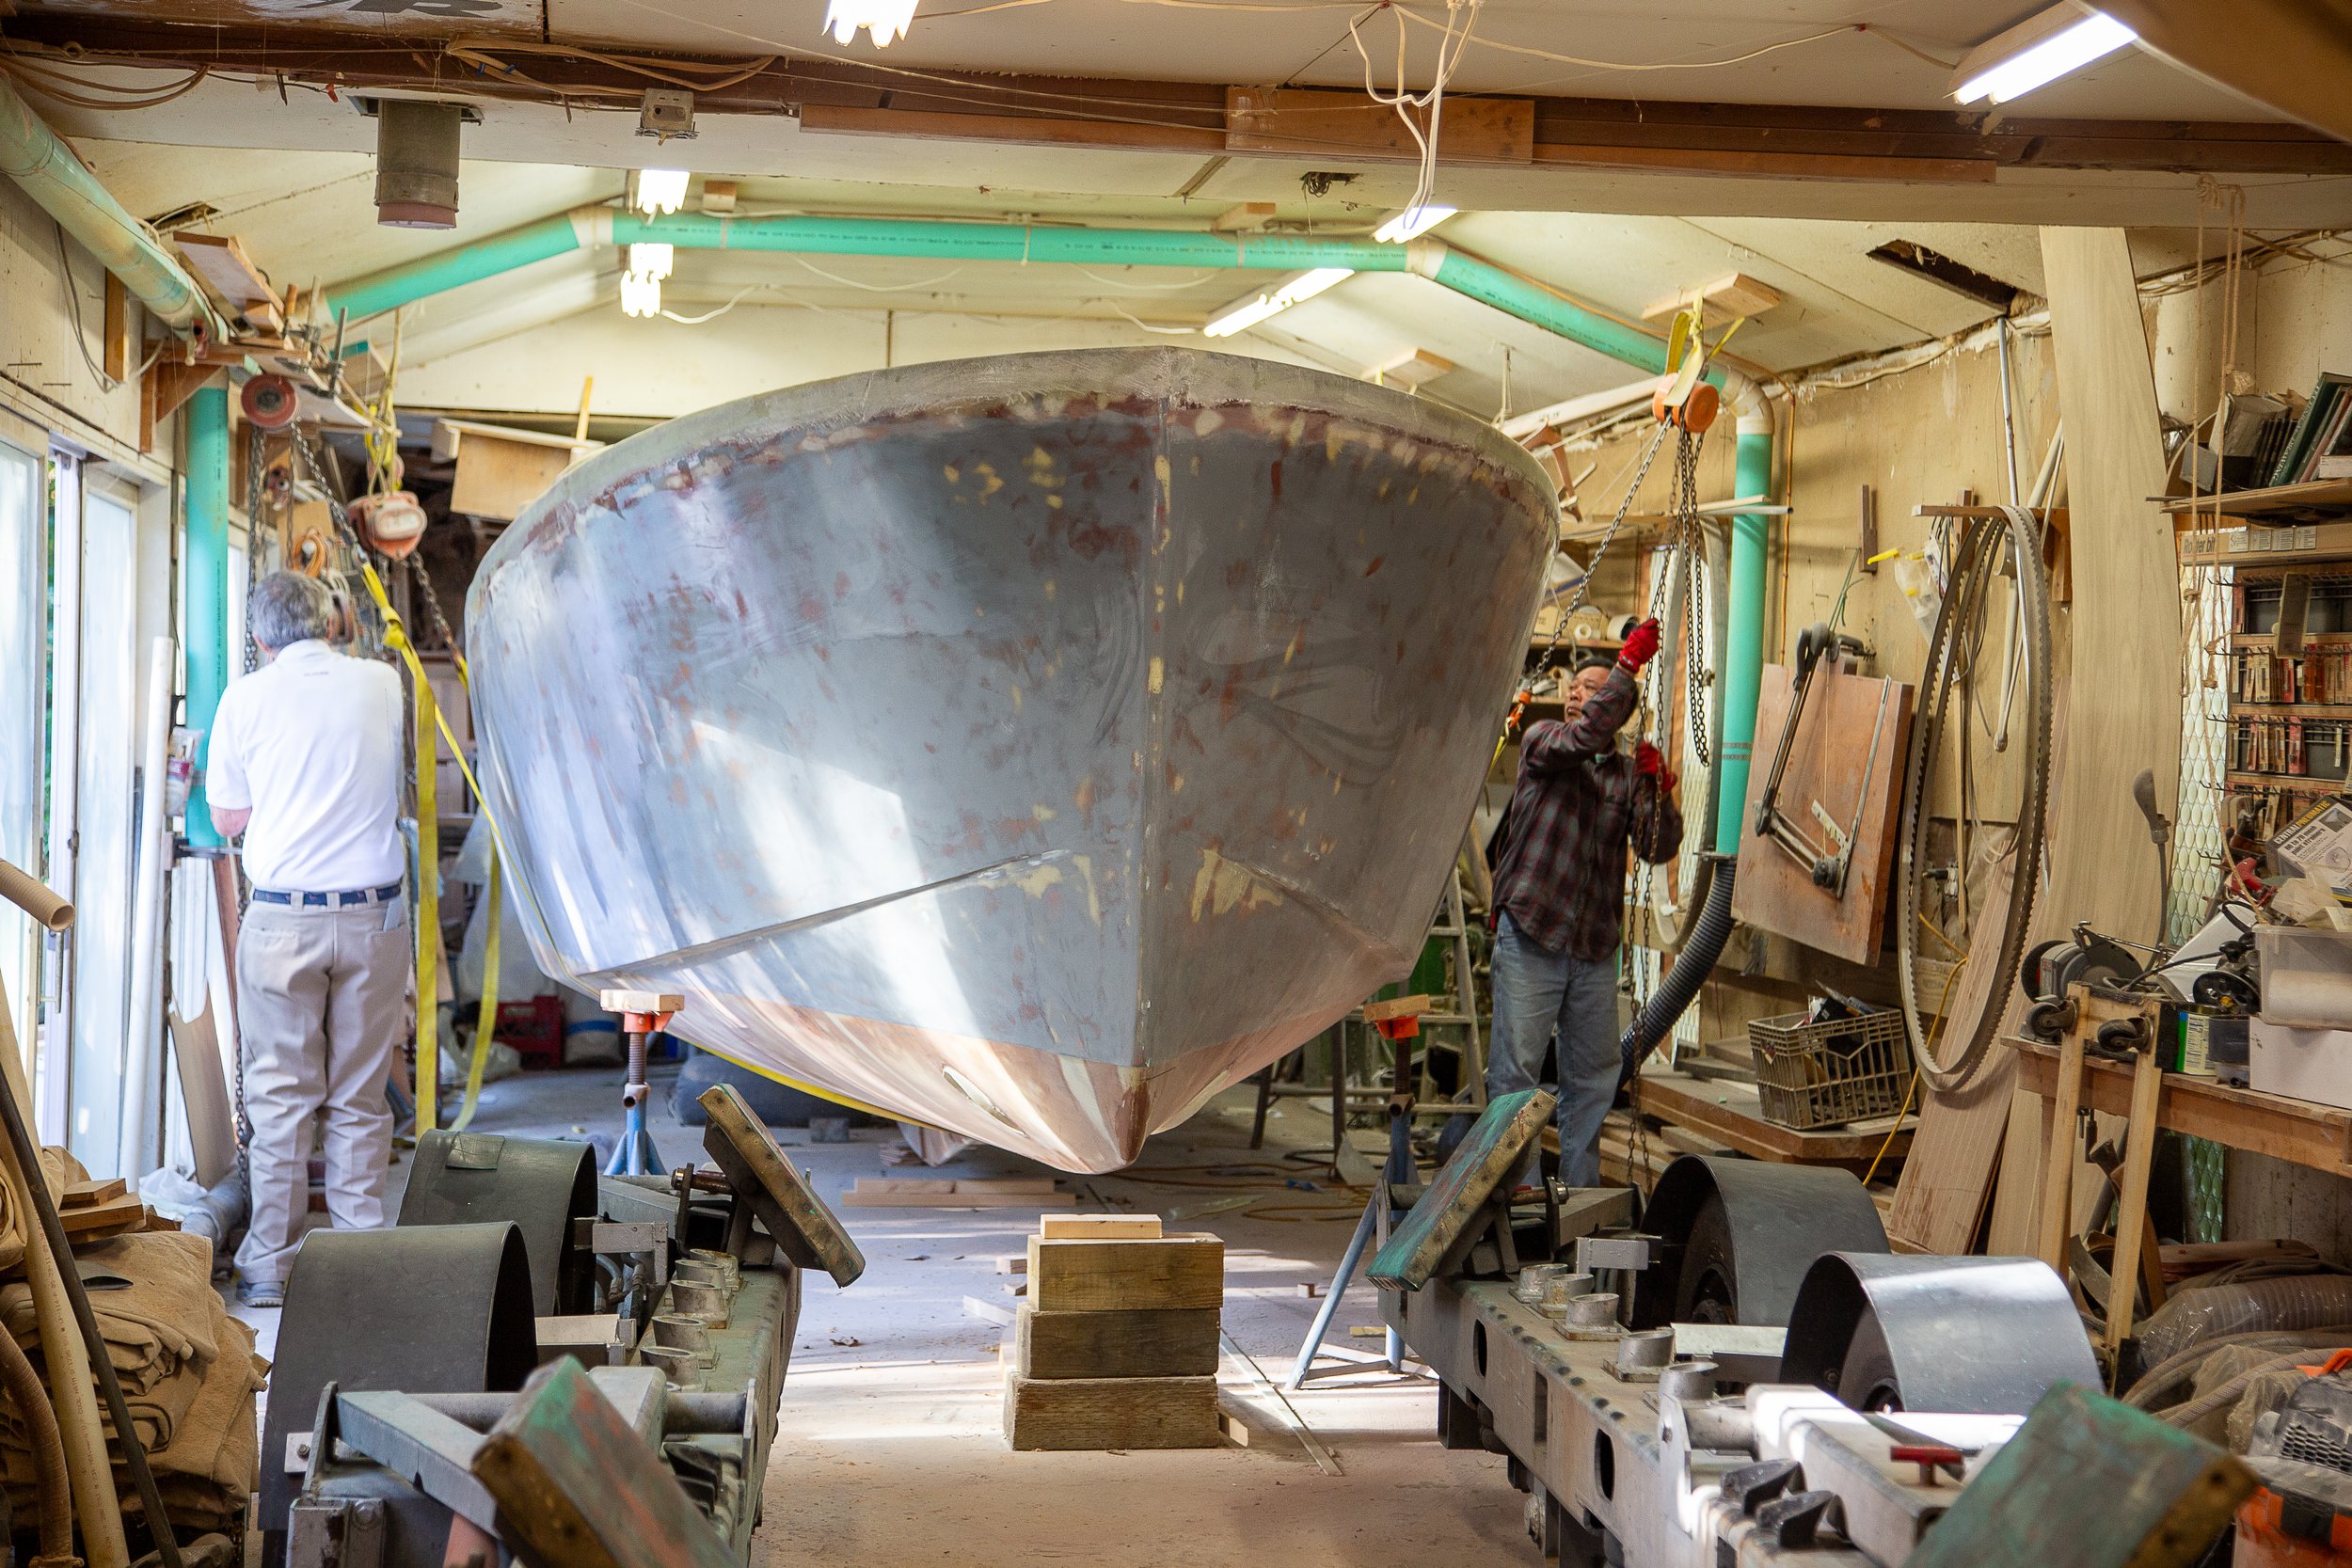    The Appy VI hull is complete! Bruce Dyson and the trailer driver lift up the boat hull to be placed on the trailer for transport to Boston Boatworks.   